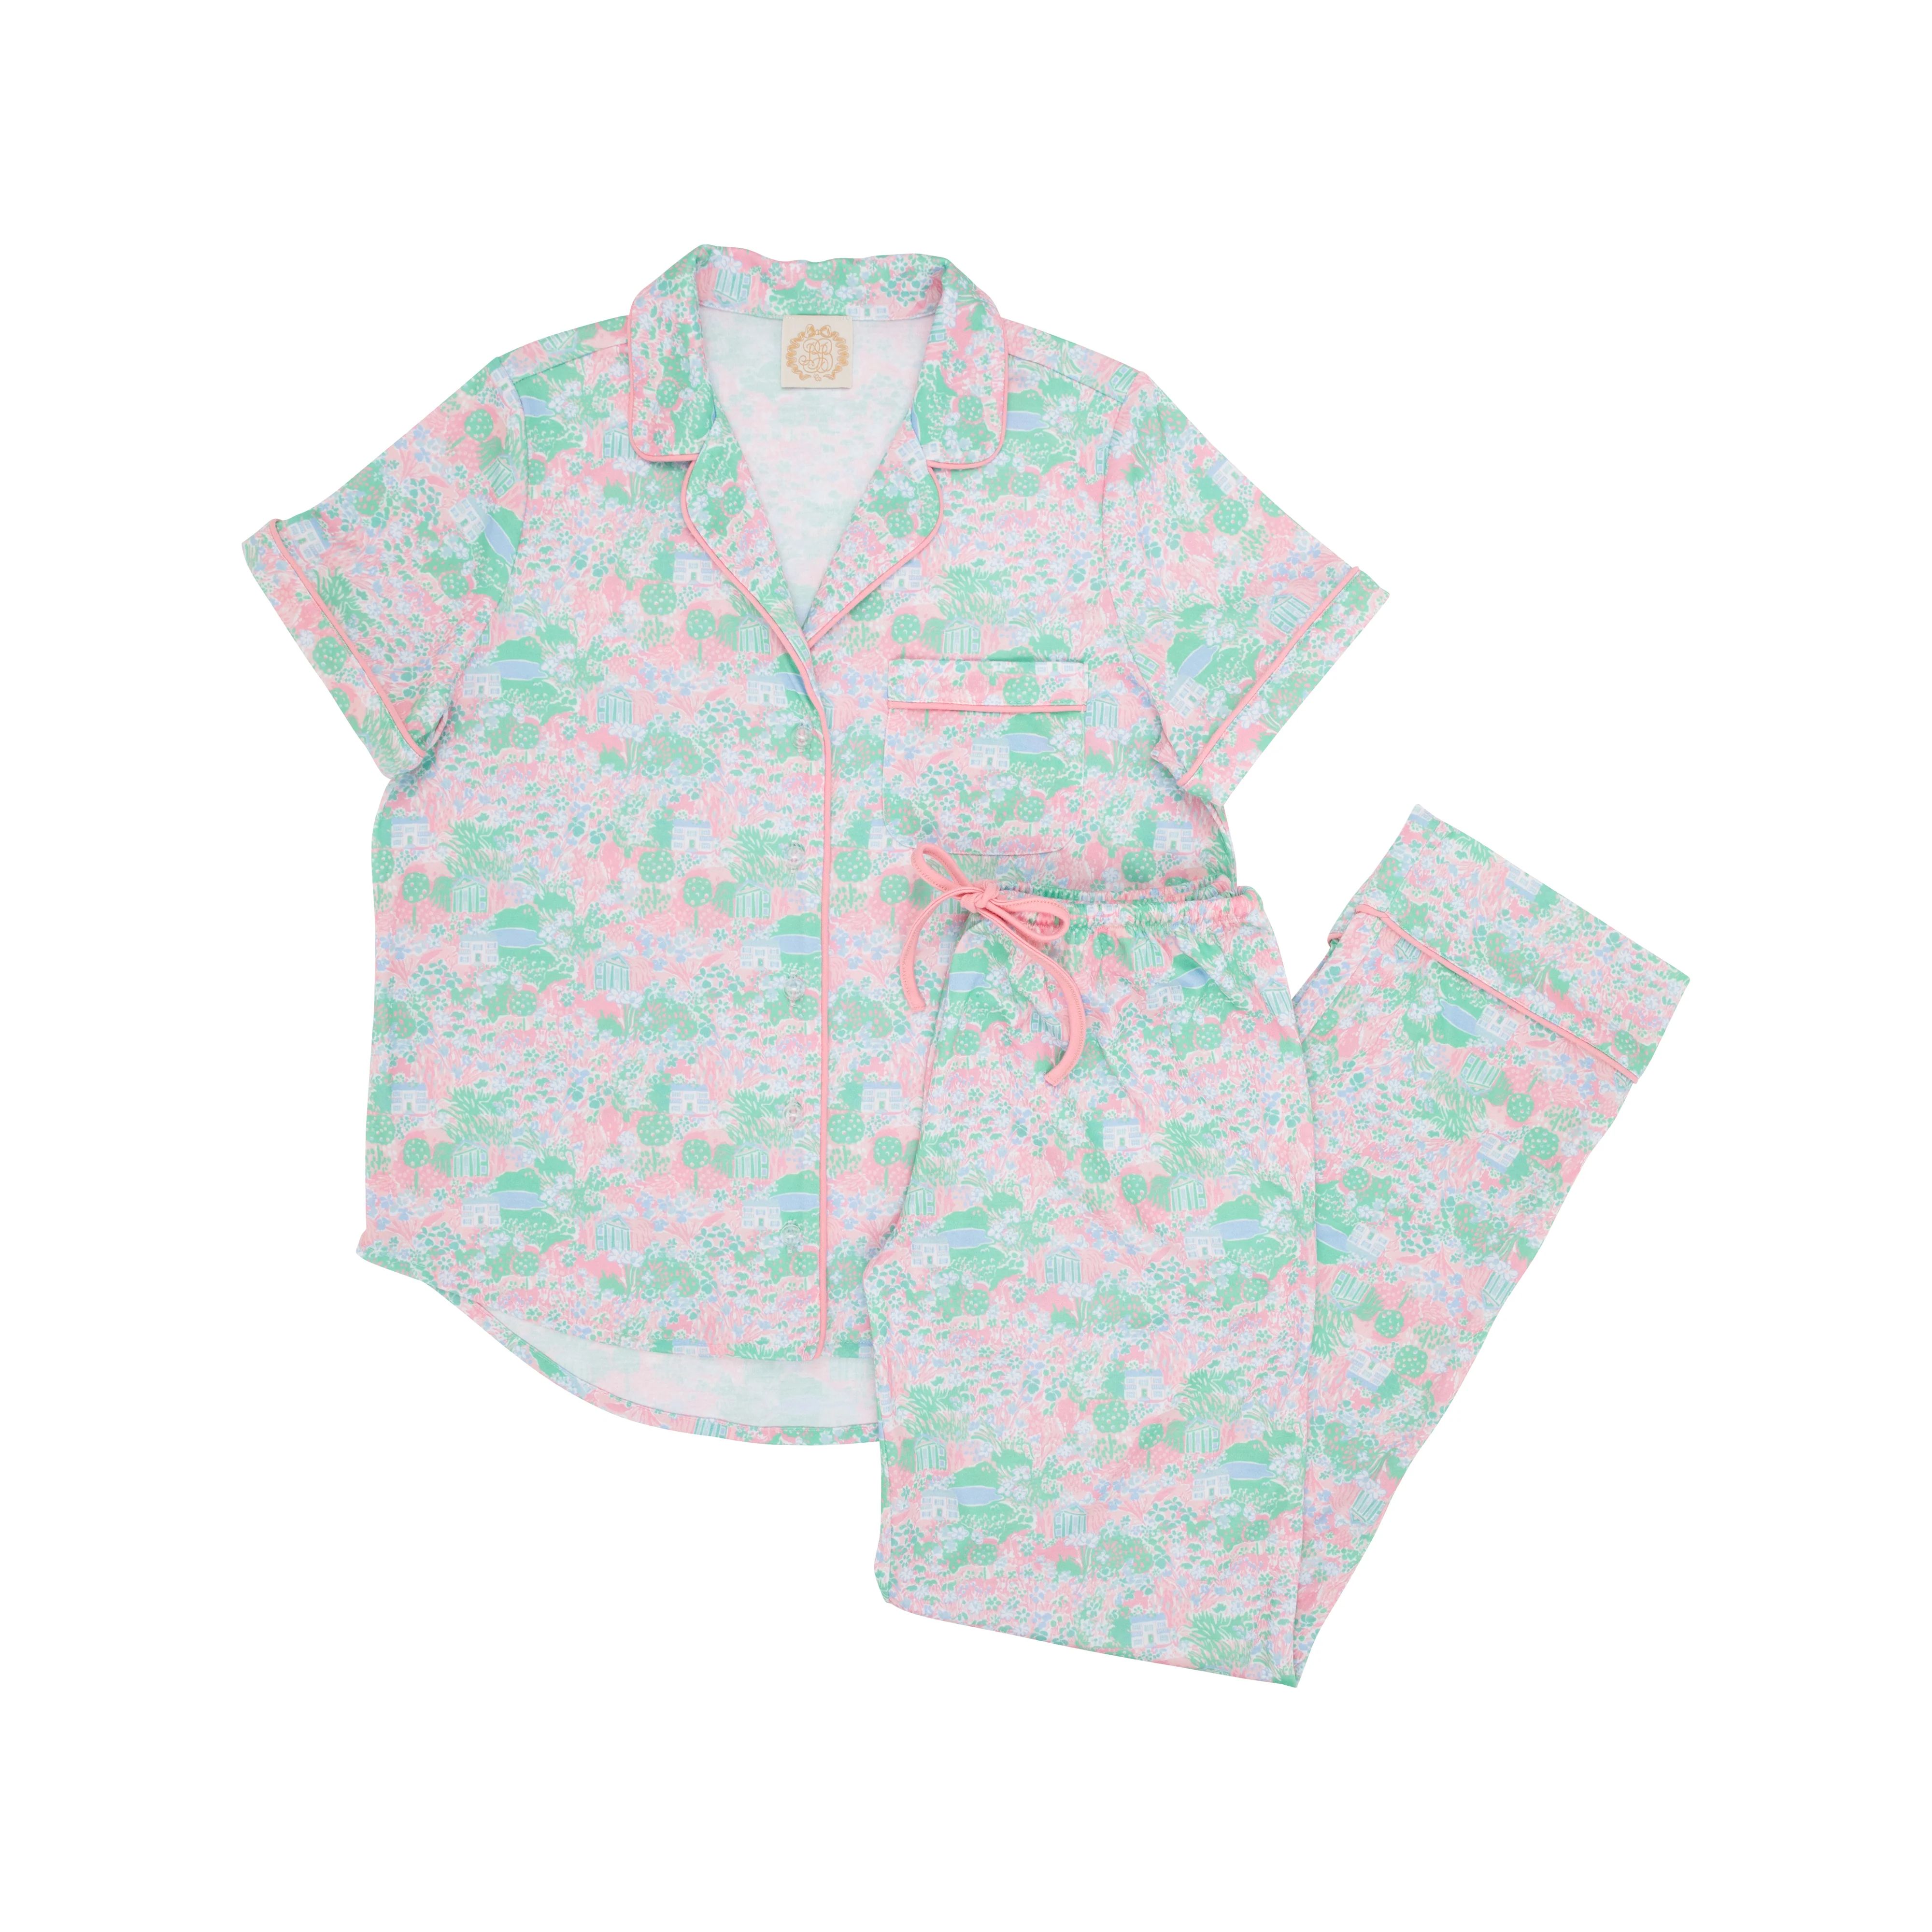 Let Me Lounge Short Sleeve Set (Ladies) - Beasley Blooms with Sandpearl Pink | The Beaufort Bonnet Company